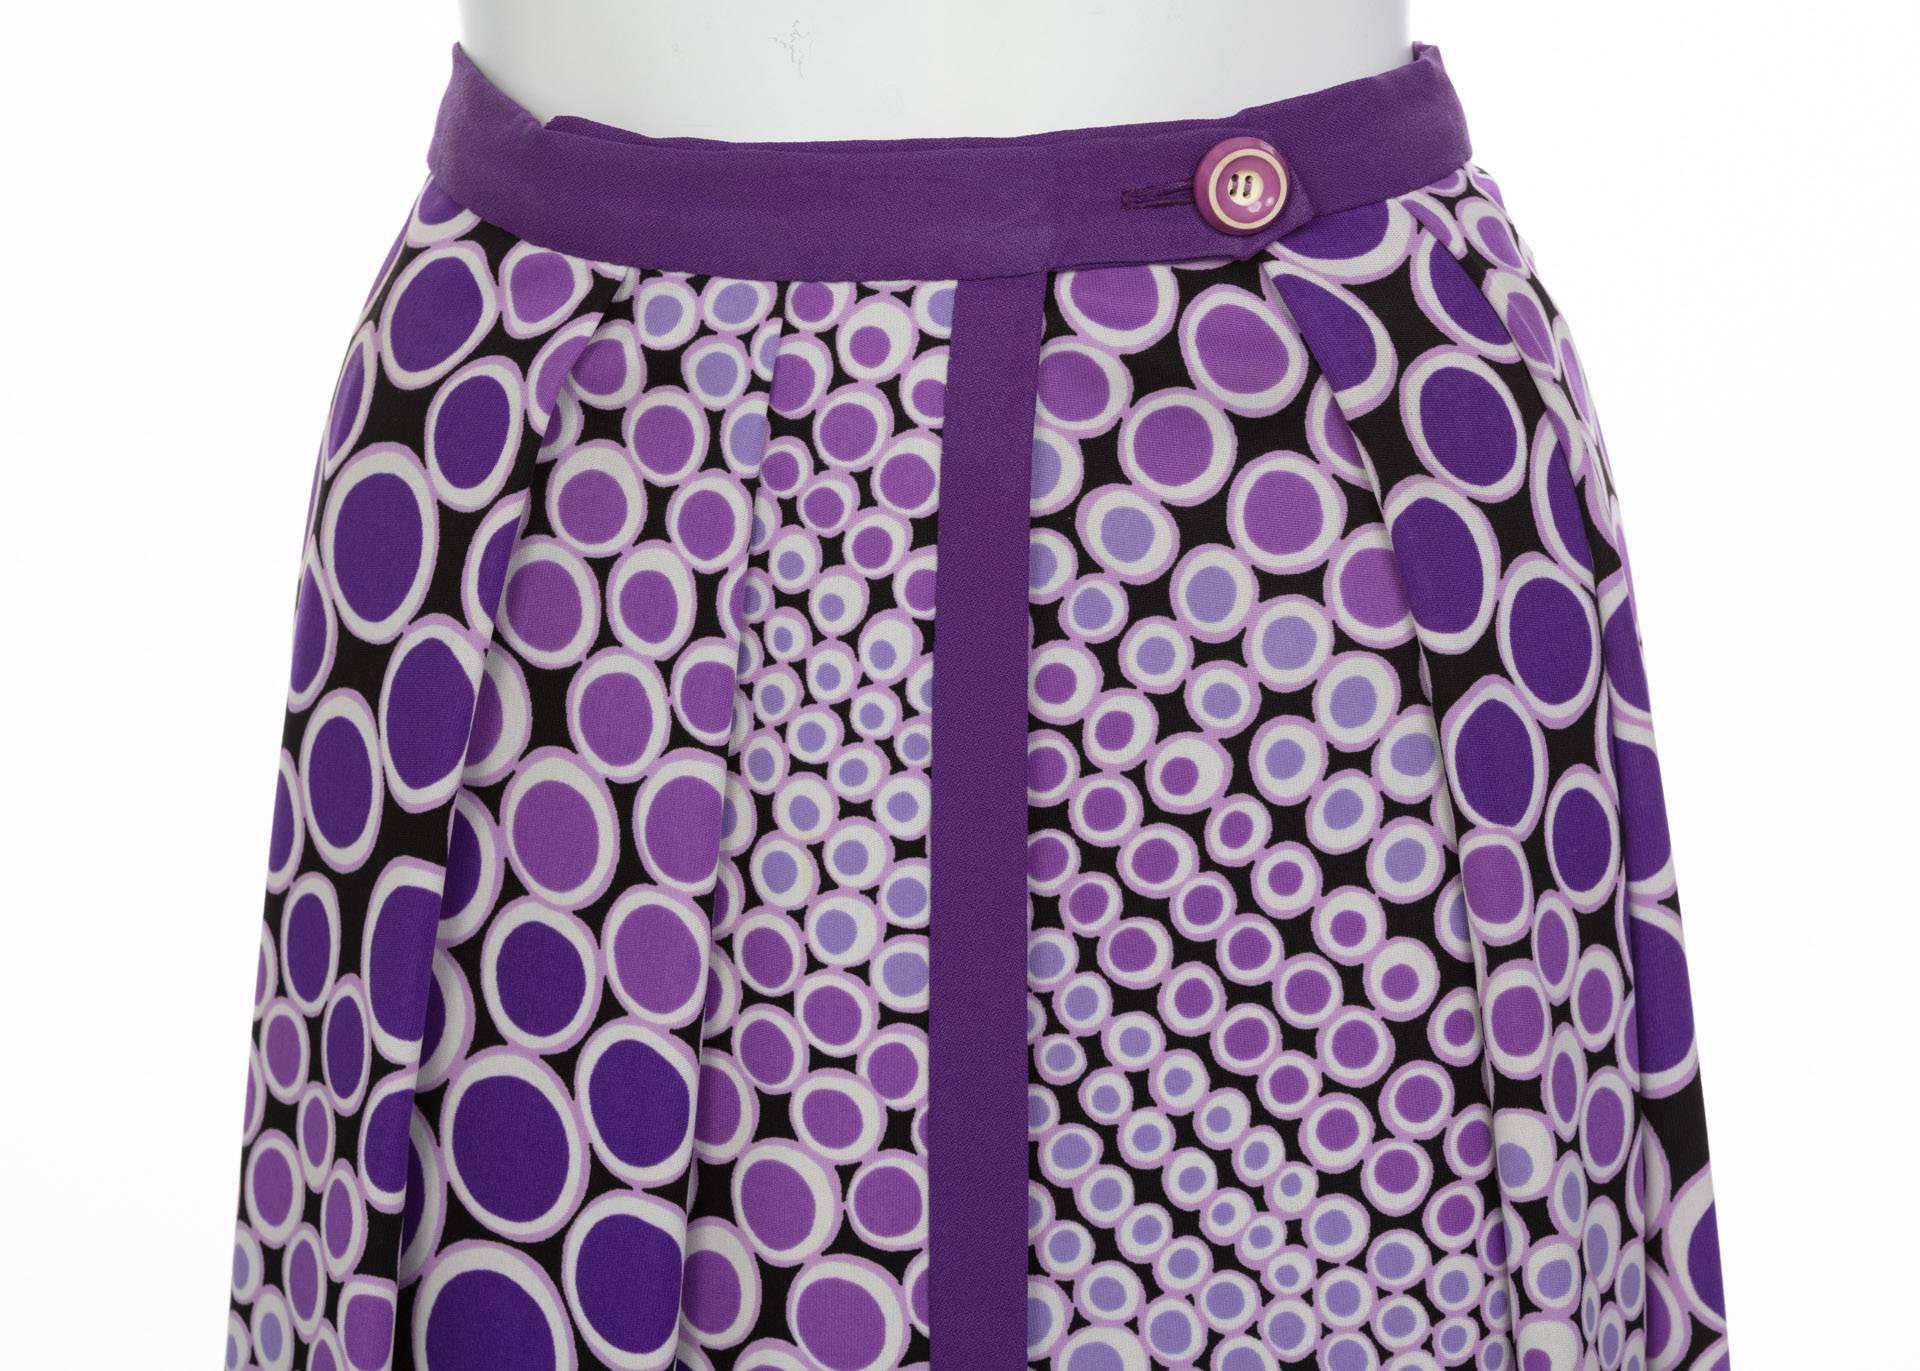 Mod Purple and White Polka Dot Maxi Wrap Skirt, 1970s  In Excellent Condition For Sale In Boca Raton, FL